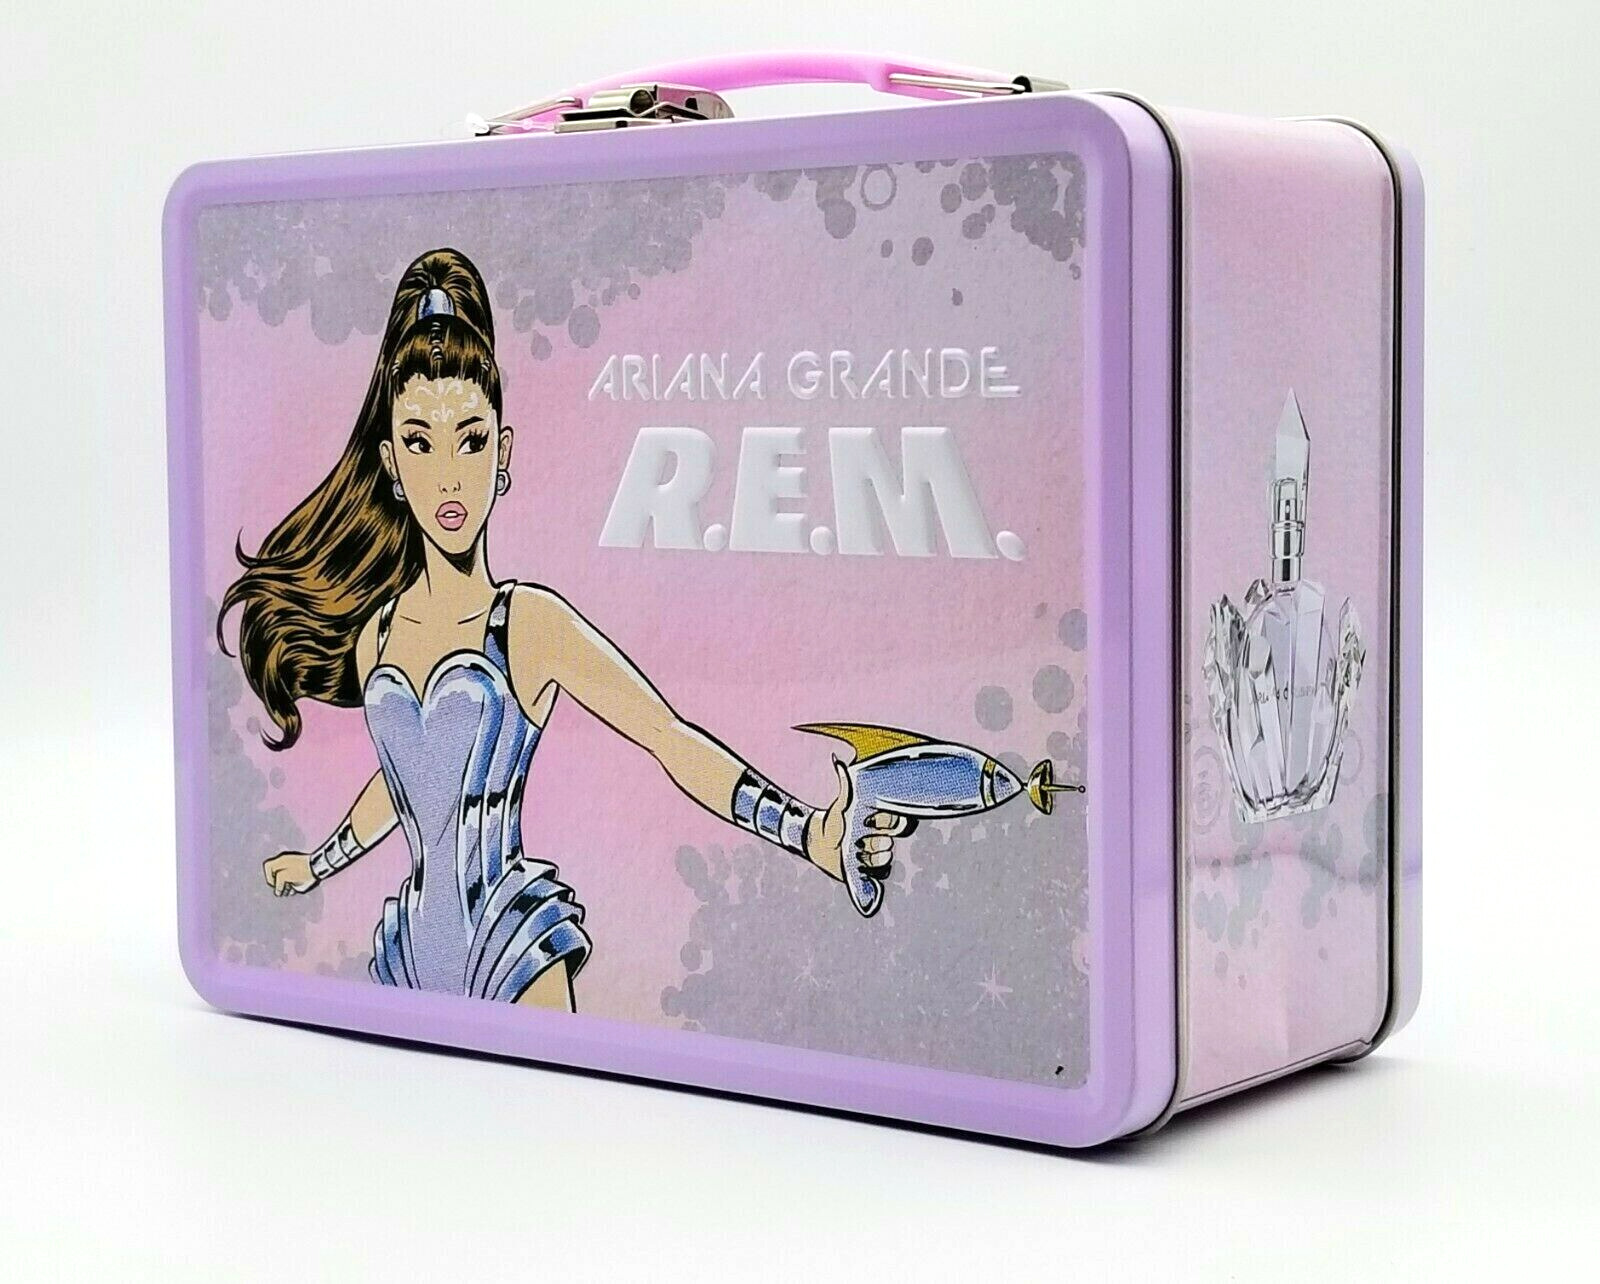 Ariana Grande Rem Perfume Collector's Edition Lunchbox Lunch Box Brand New! Nwt